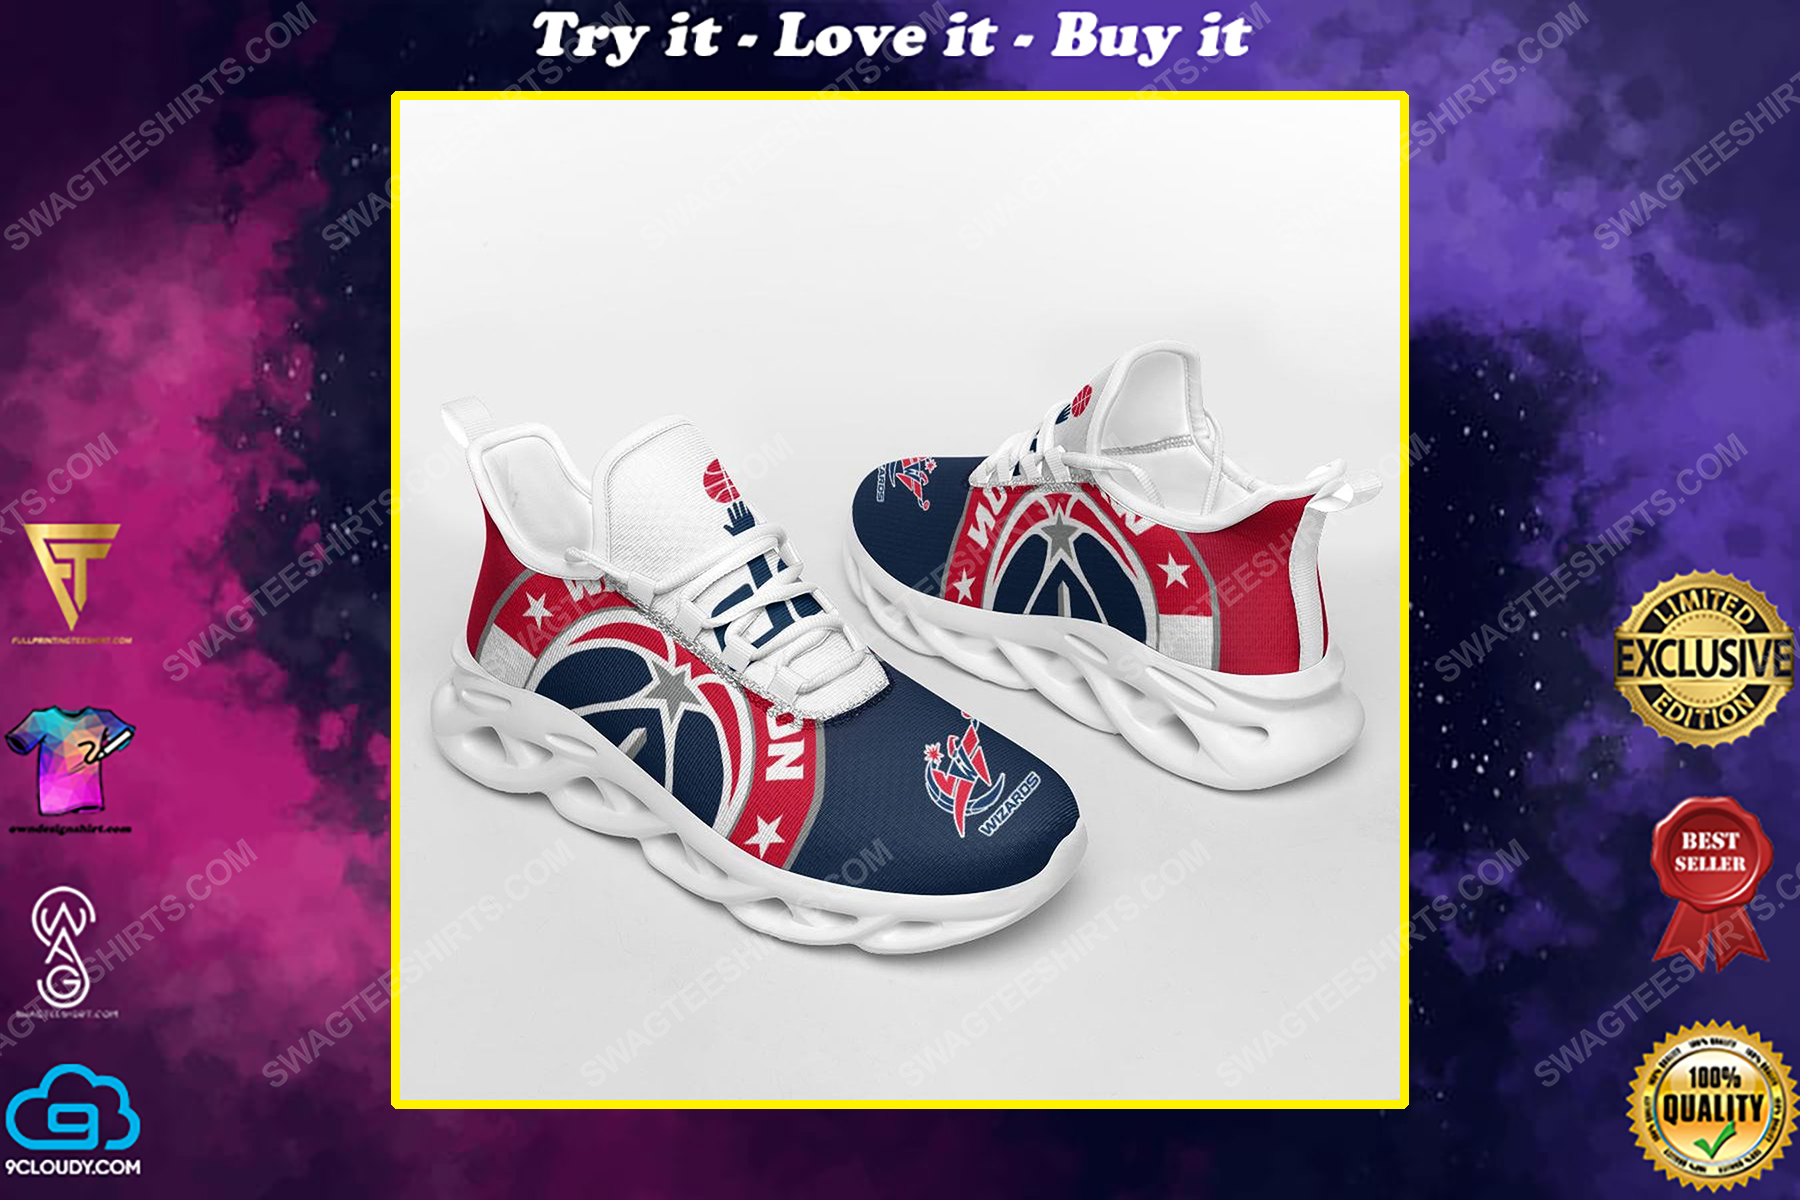 The washington wizards basketball team max soul shoes